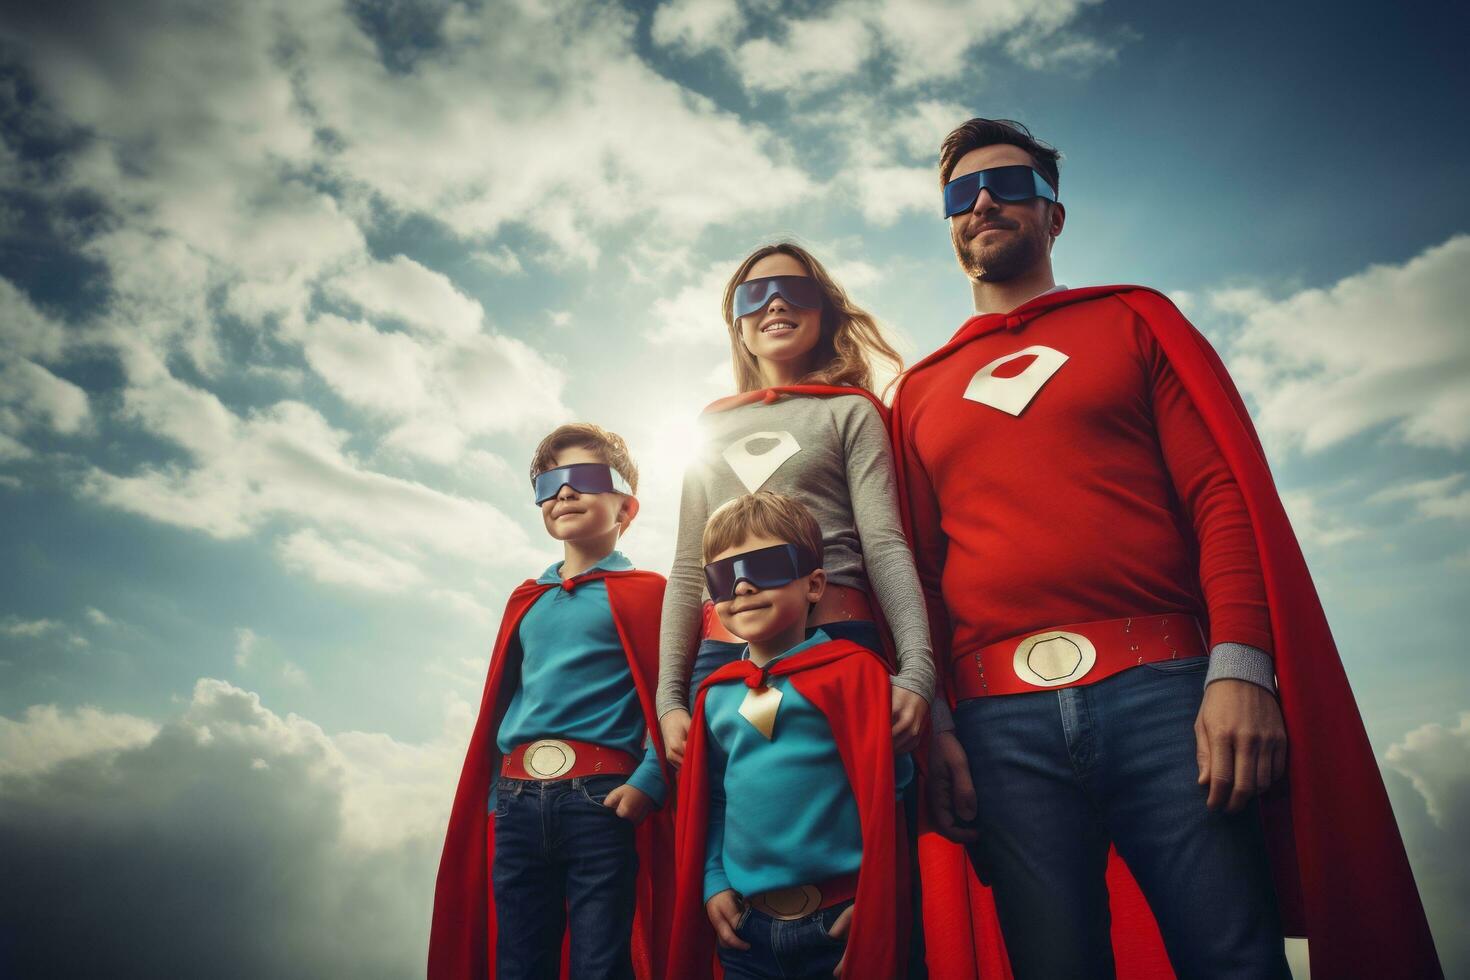 Dad with sons and daughter in superhero costume photo